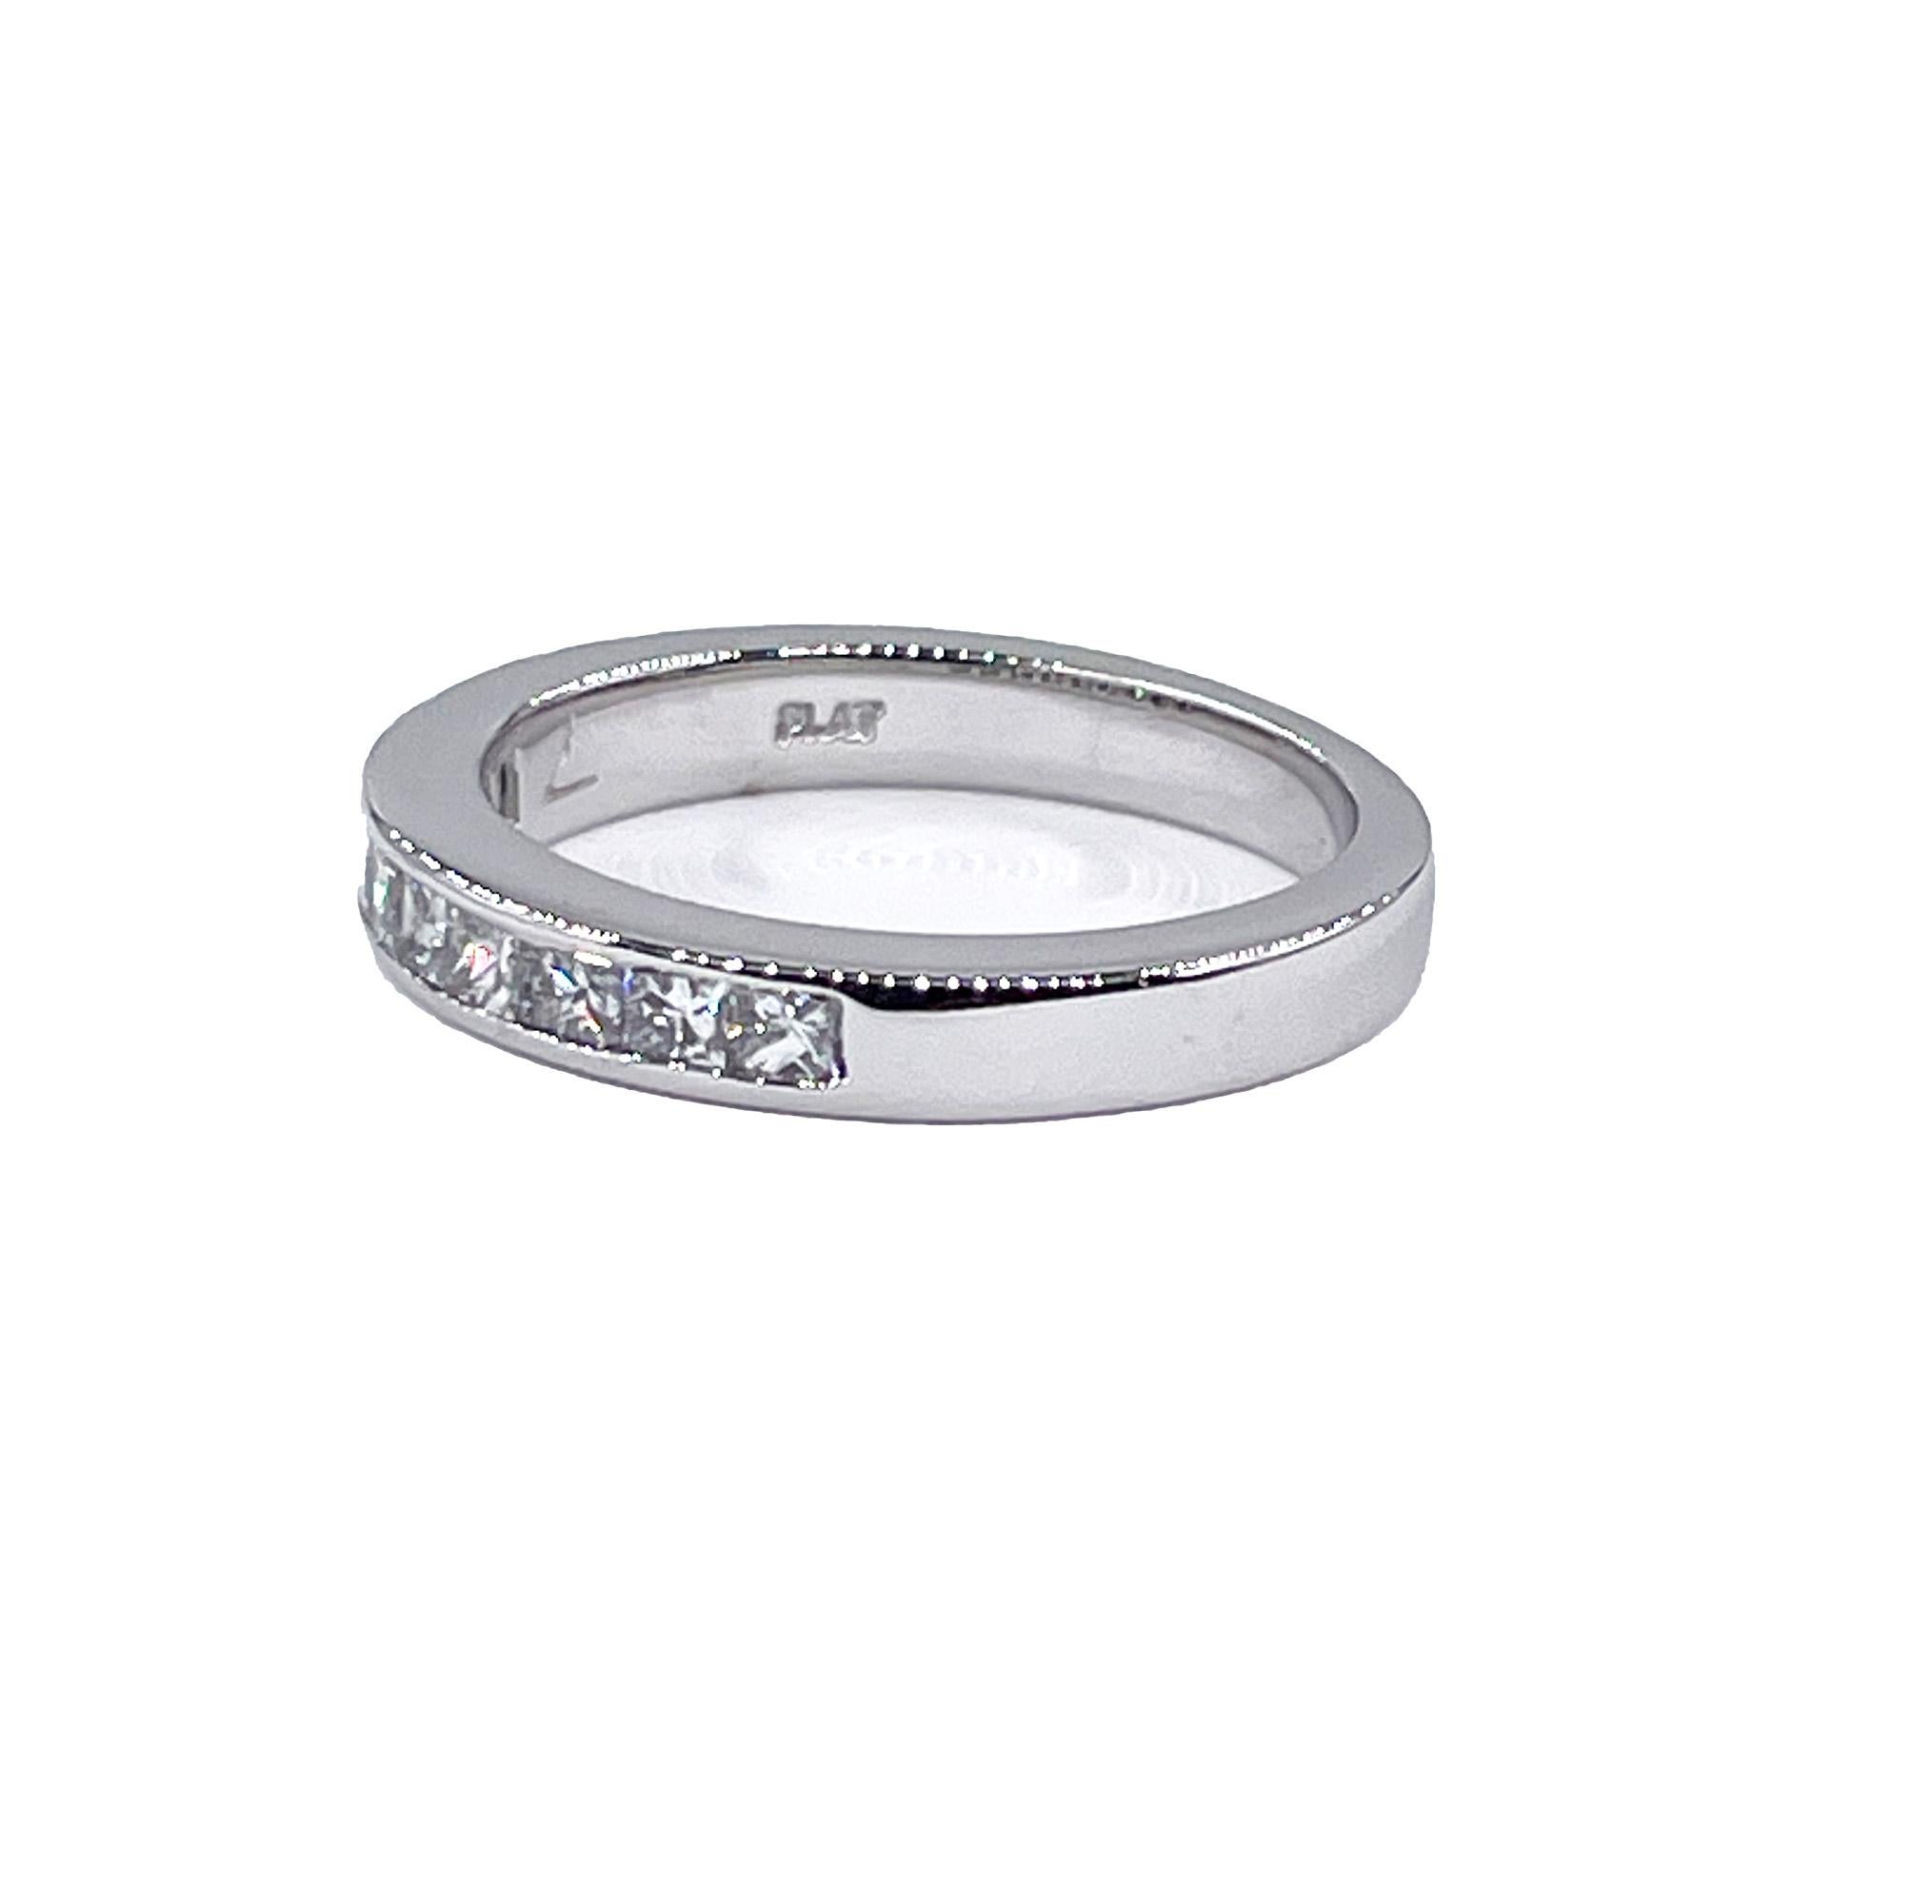 1/2 Way Around 0.50ct Princess cut Diamond Wedding Band 3.2mm Platinum Ring - GORGEOUS Platinum RING from our EXQUISITE Anniversary, Wedding Band Collection. 

Say “I do” with this timeless channel set Princess cut diamonds, wedding band. 
Classy